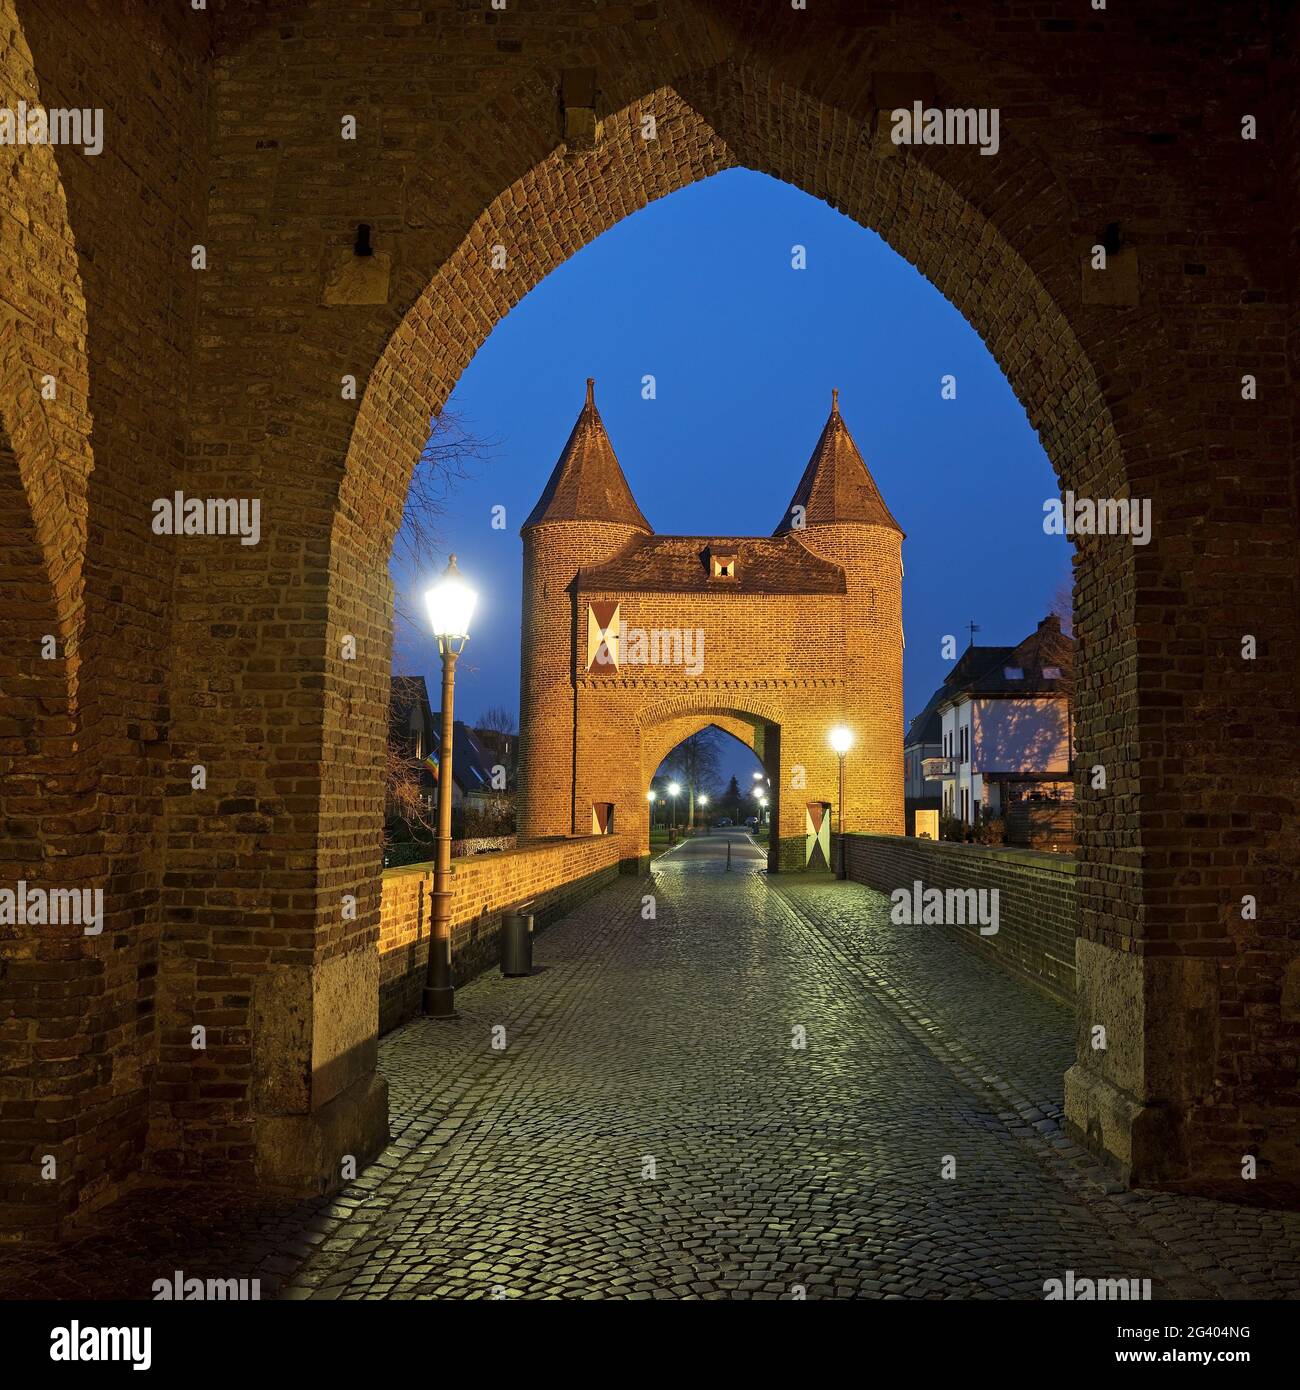 Klever Tor, view through the inside to the outer gate in the evening, Xanten, Germany, Europe Stock Photo